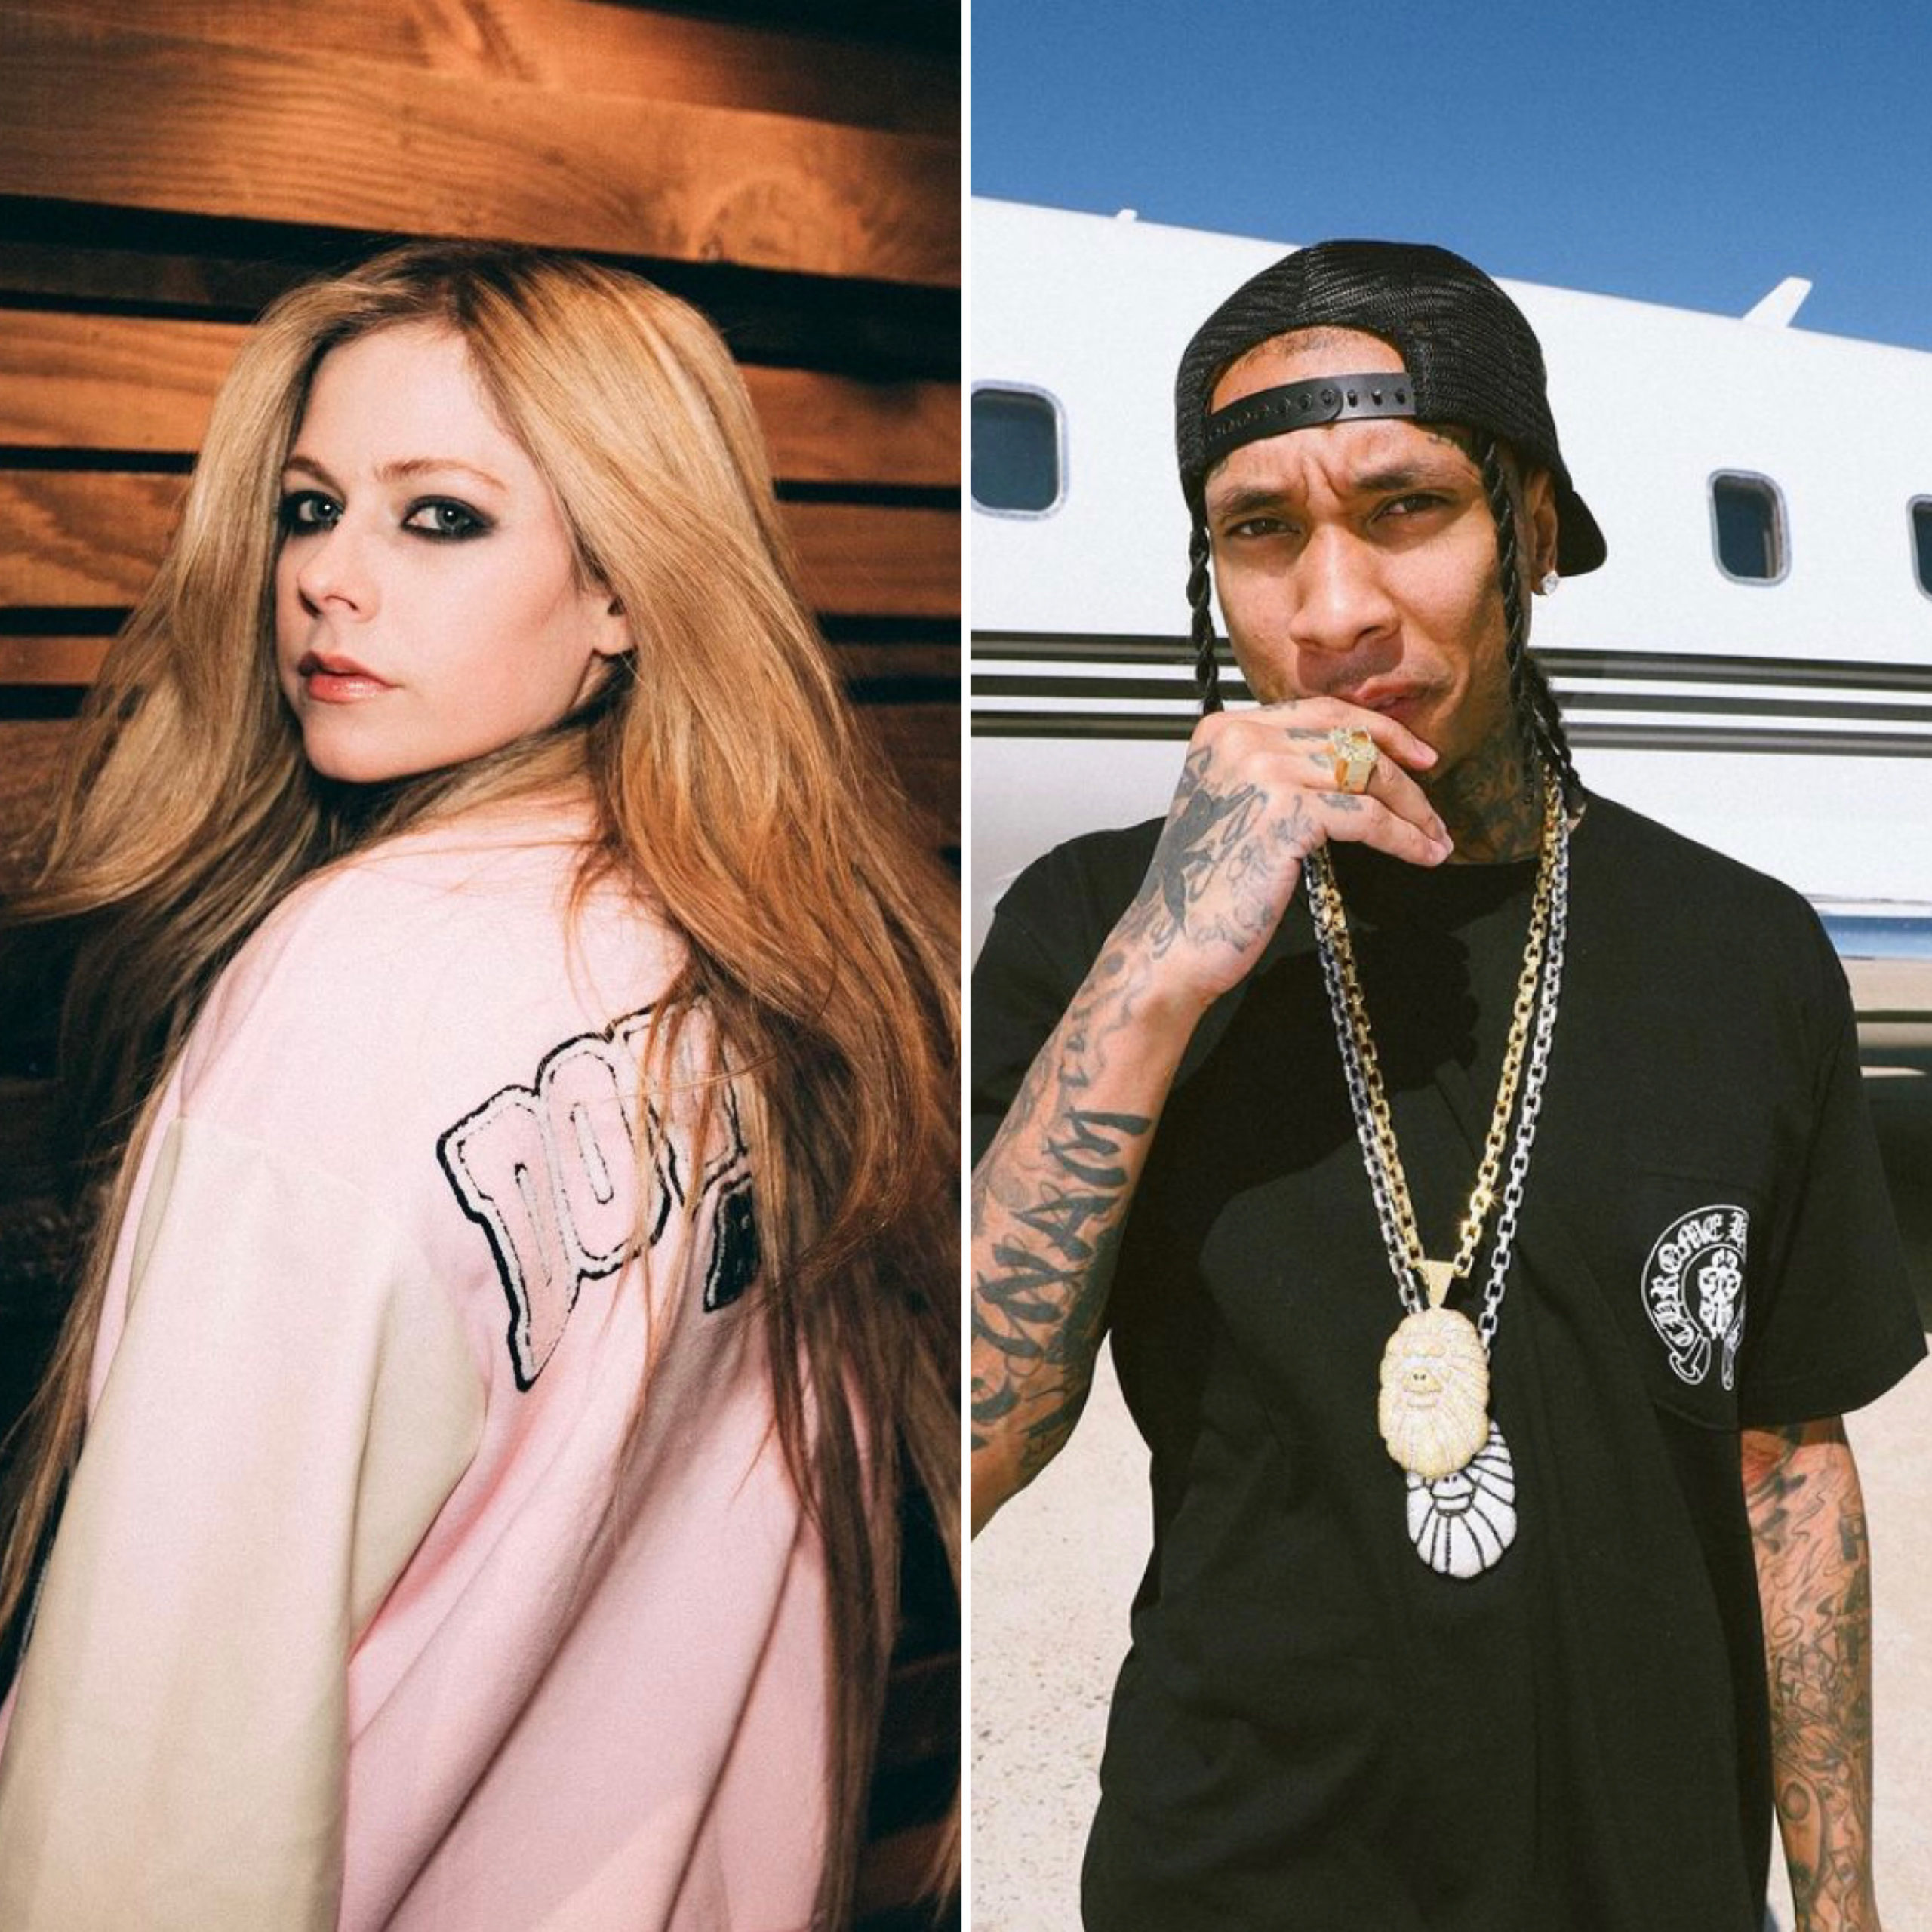 Avril Lavigne Upskirt - Avril Lavigne & Tyga Spark Dating Rumors After Being Seen Sharing Intimate  Moment Following Dinner Date - theJasmineBRAND